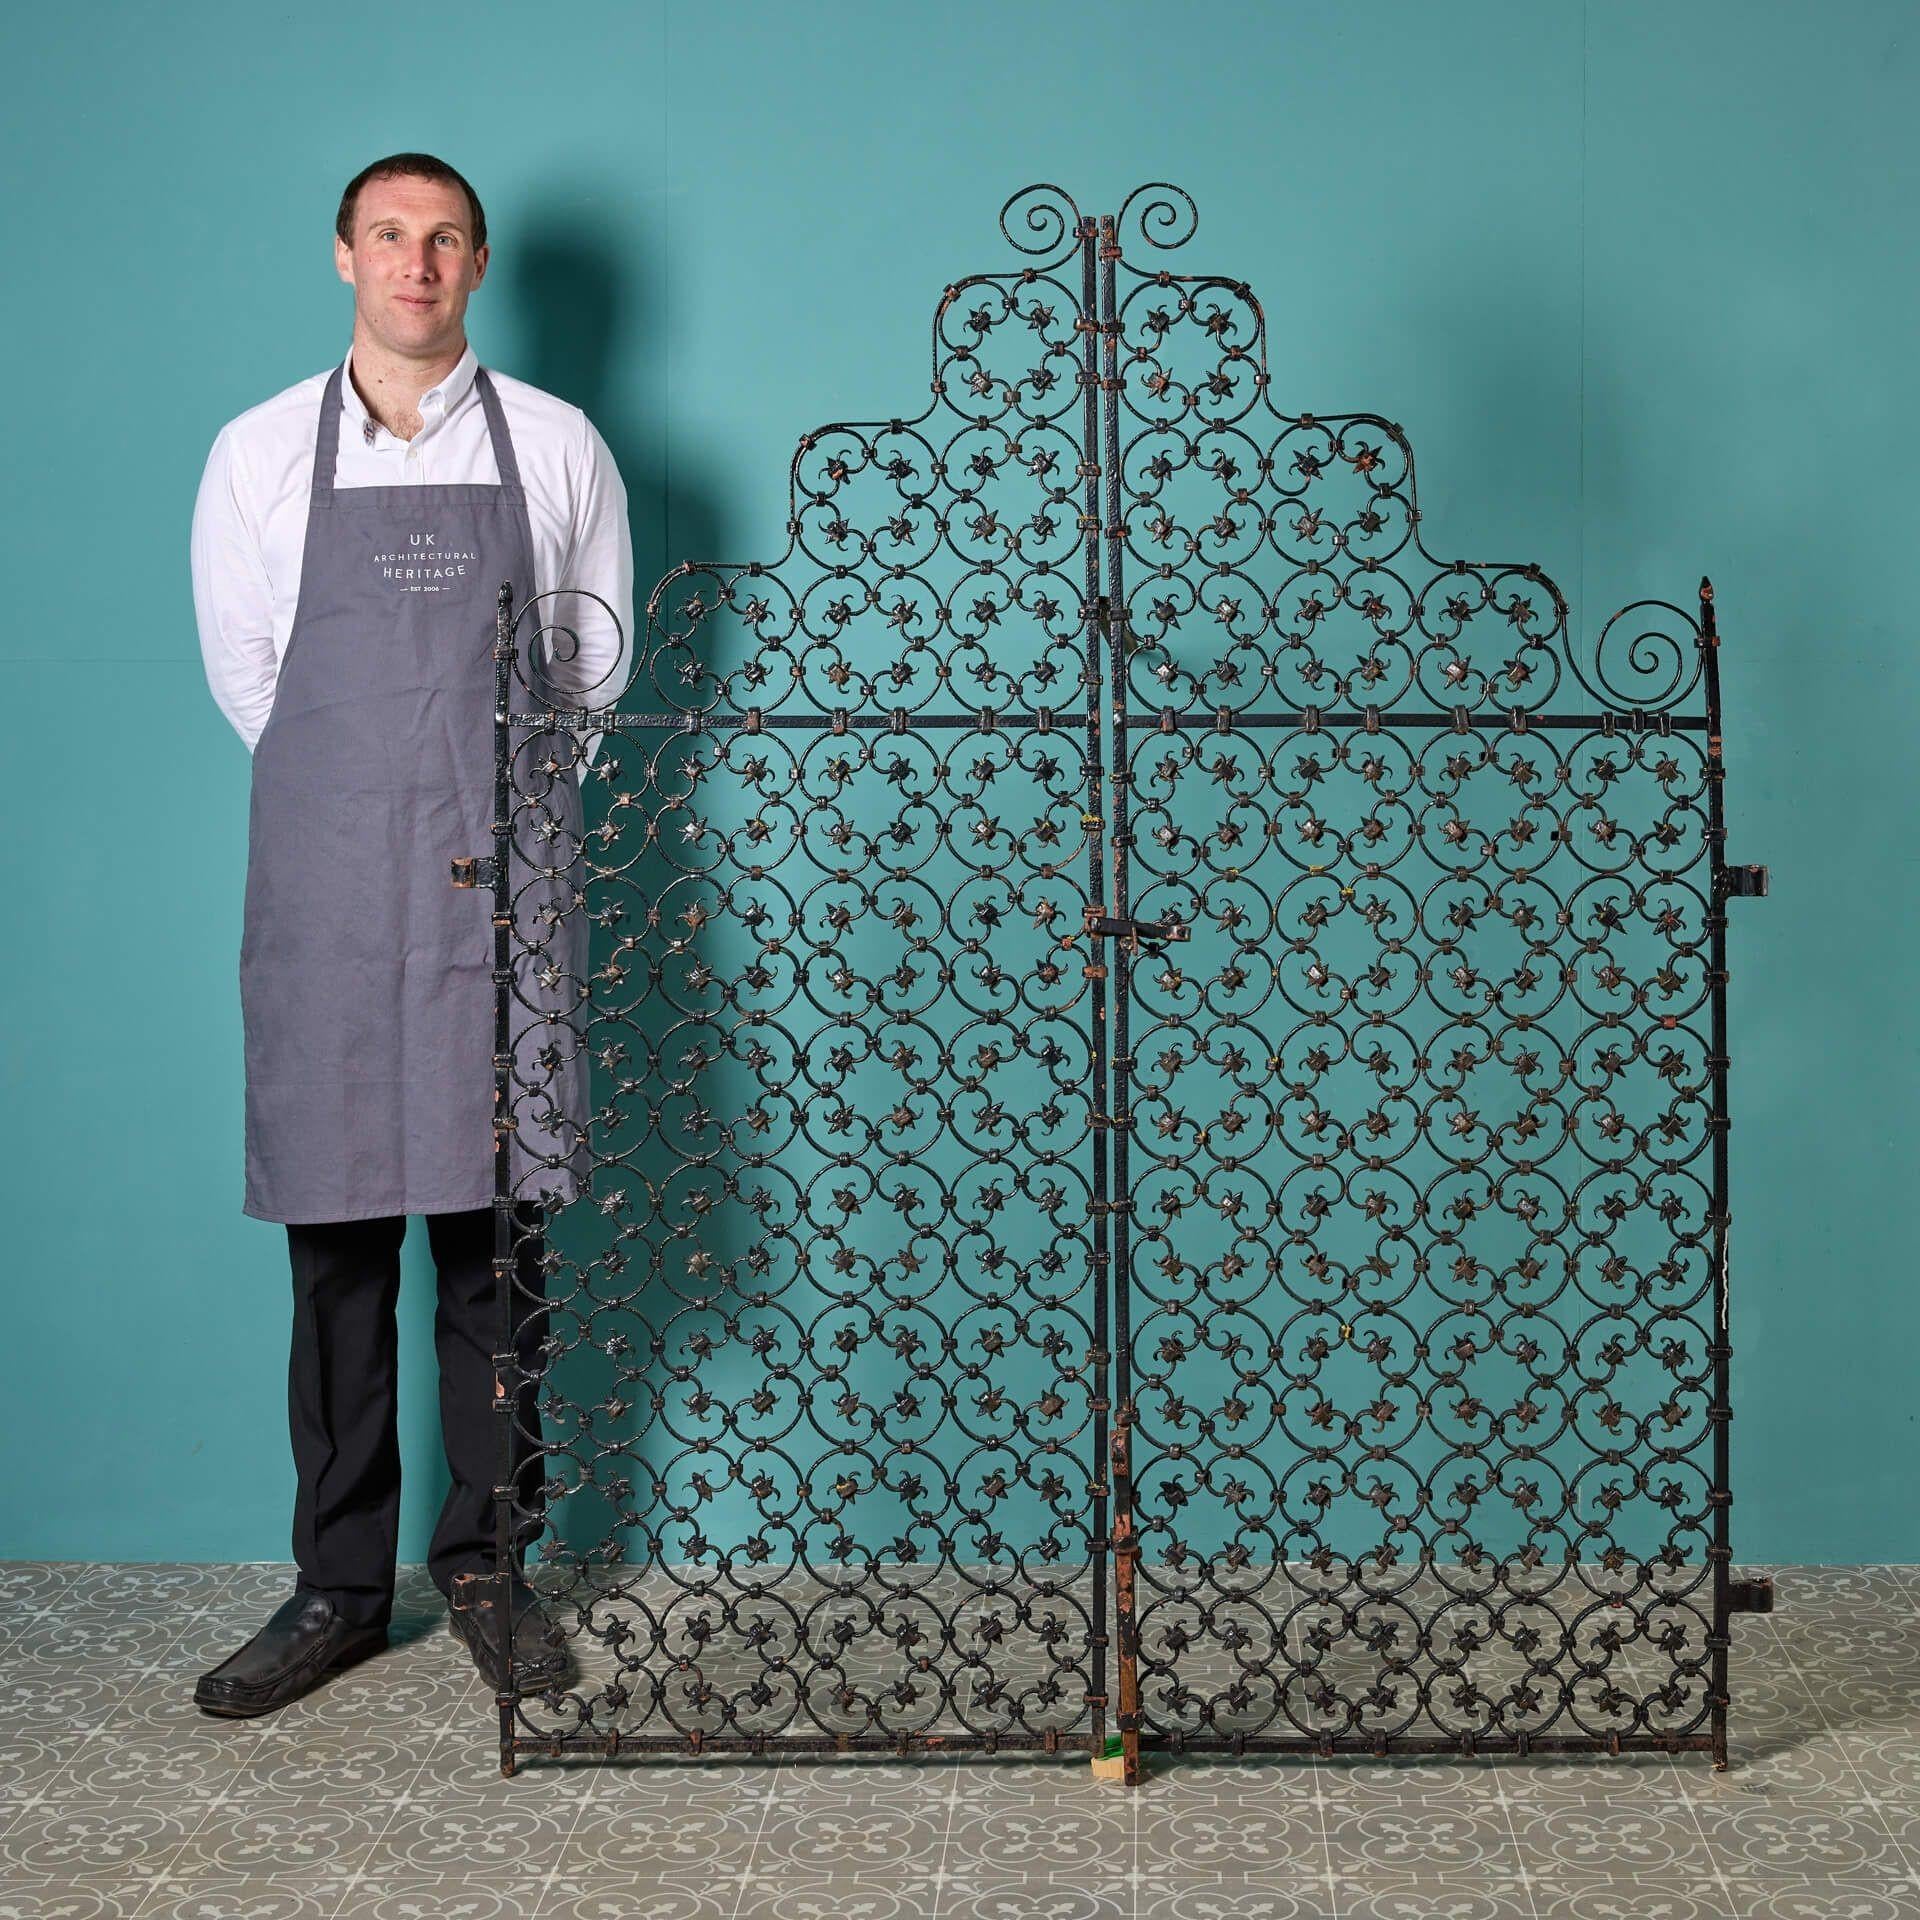 These Edwardian era wrought iron garden gates circa 1900 bring instant grandeur to a garden with their ornate craftsmanship and abundance of repeating scrollwork. They have stood the test of time for more than 120 years and as such would look